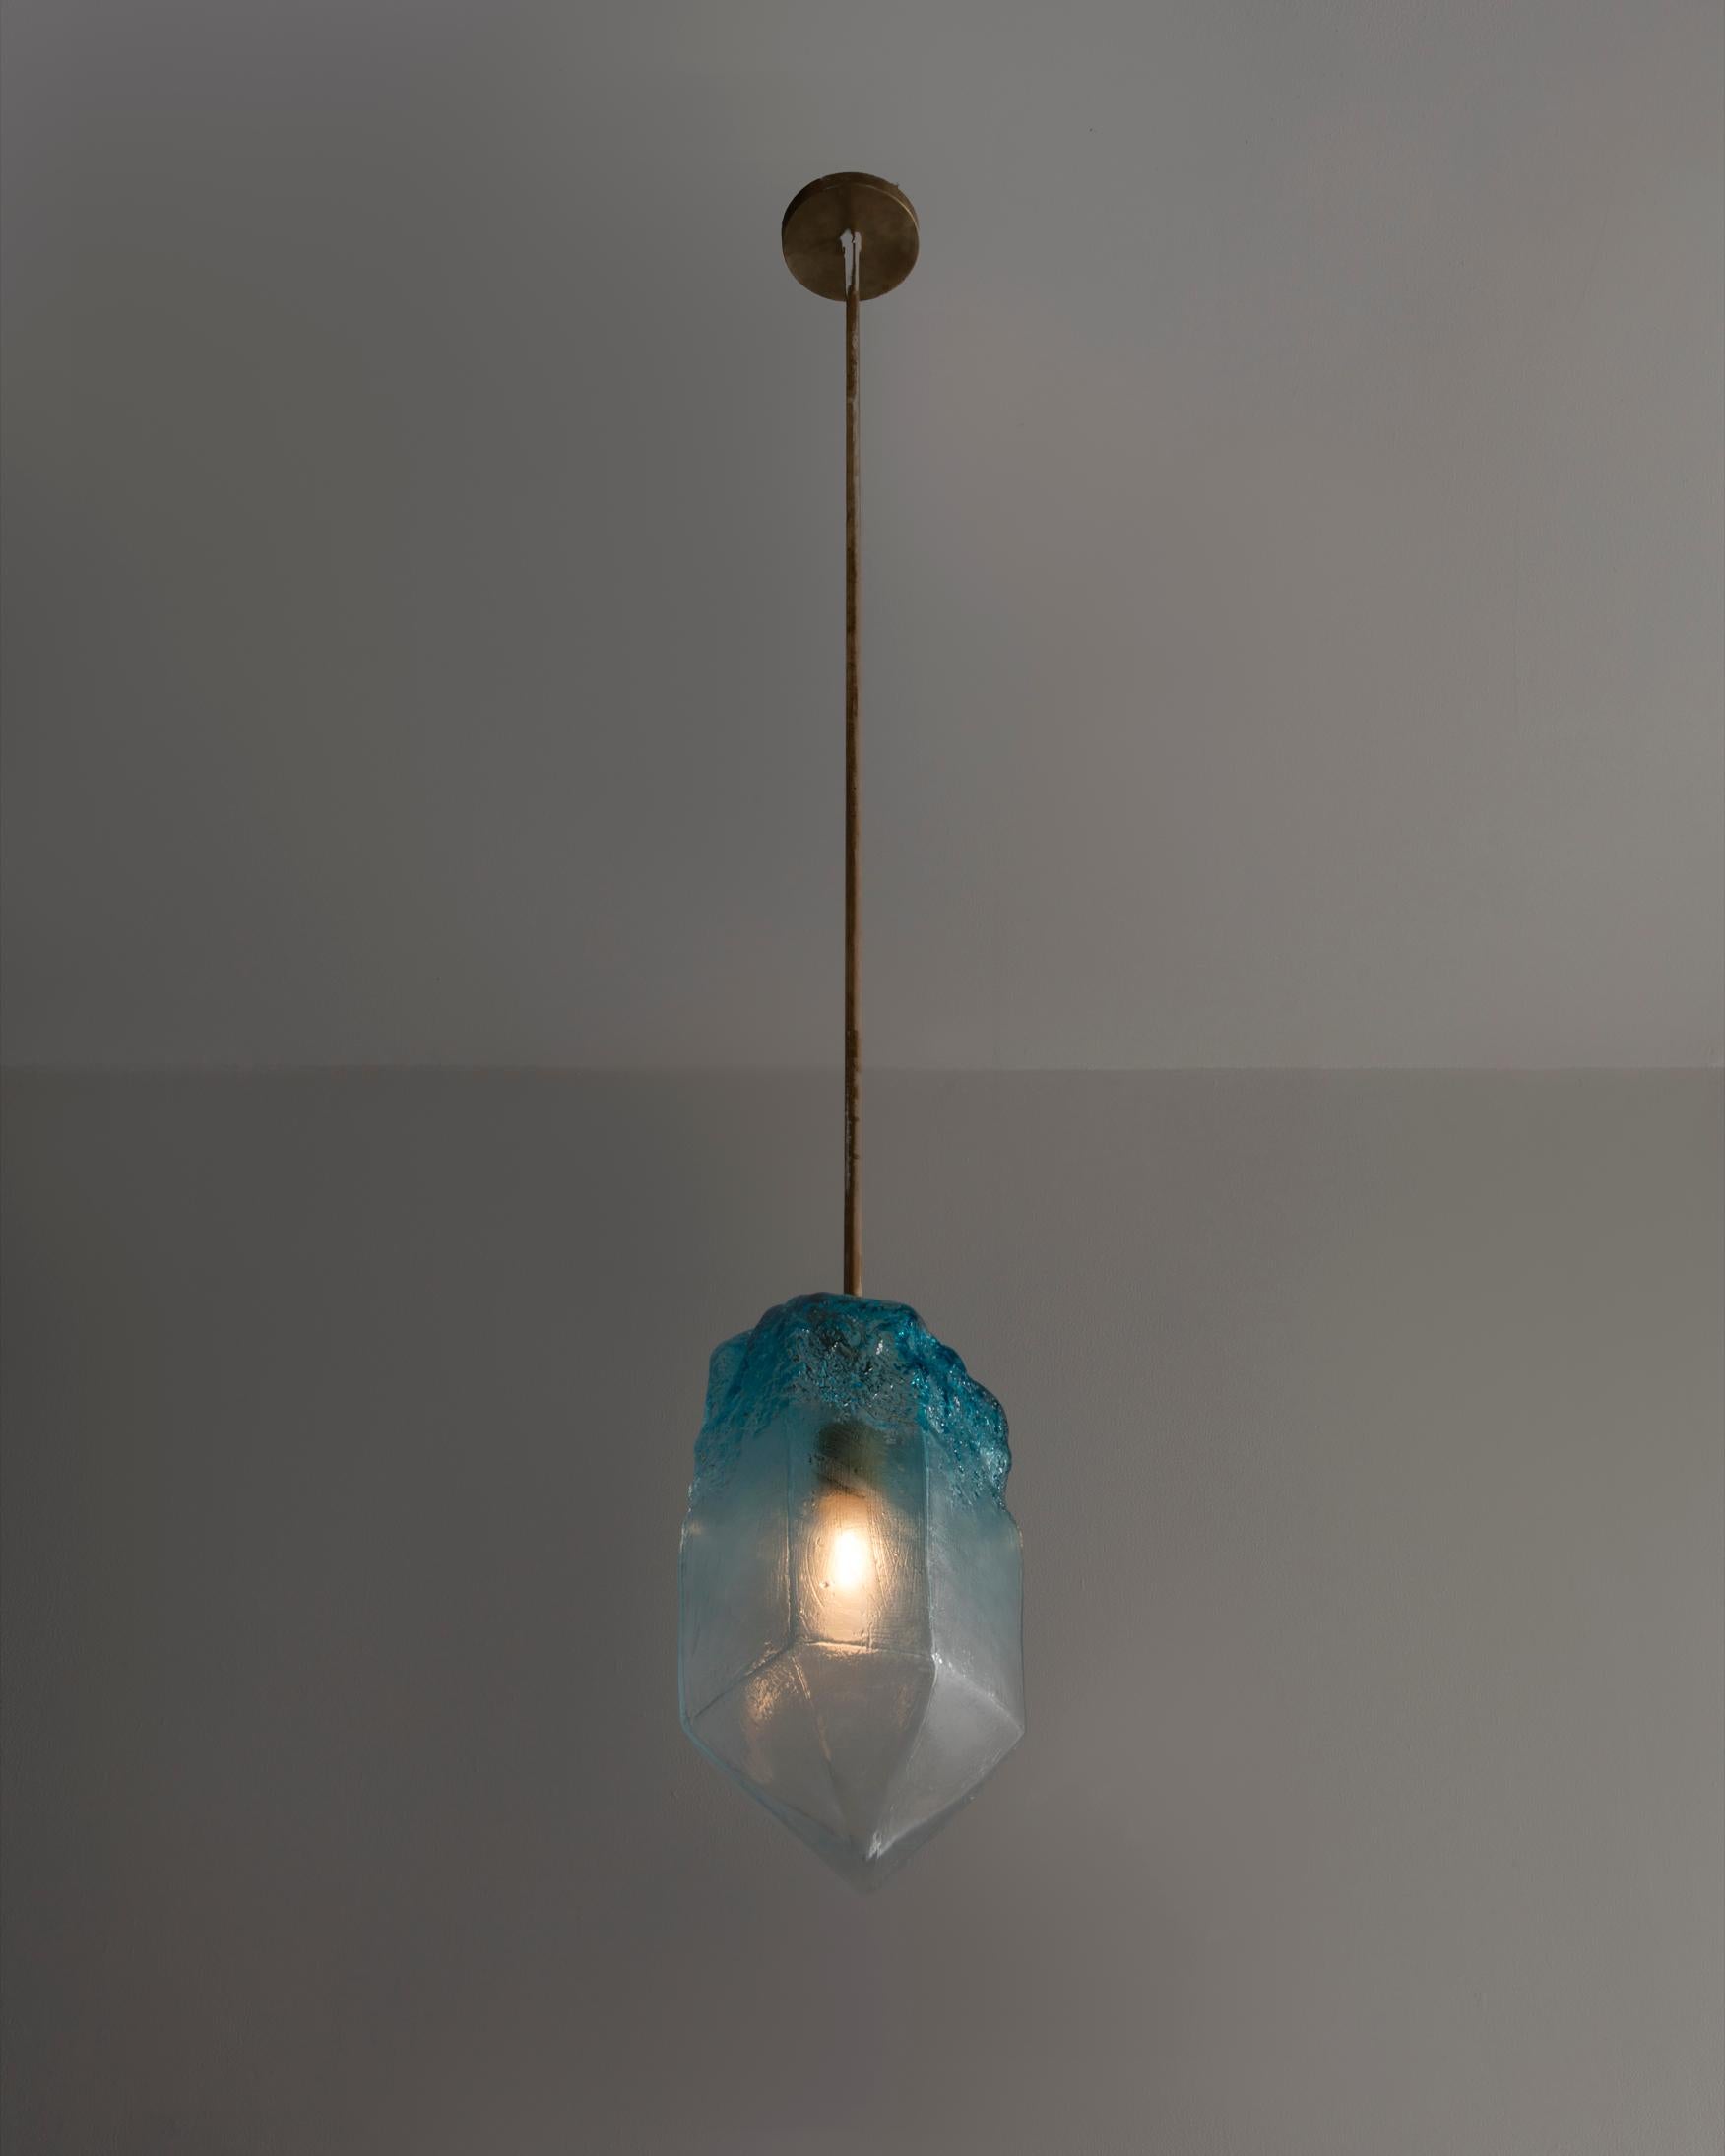 American Sculptural Pendant Light in Turquoise and Nickel by Jeff Zimmerman, 2016